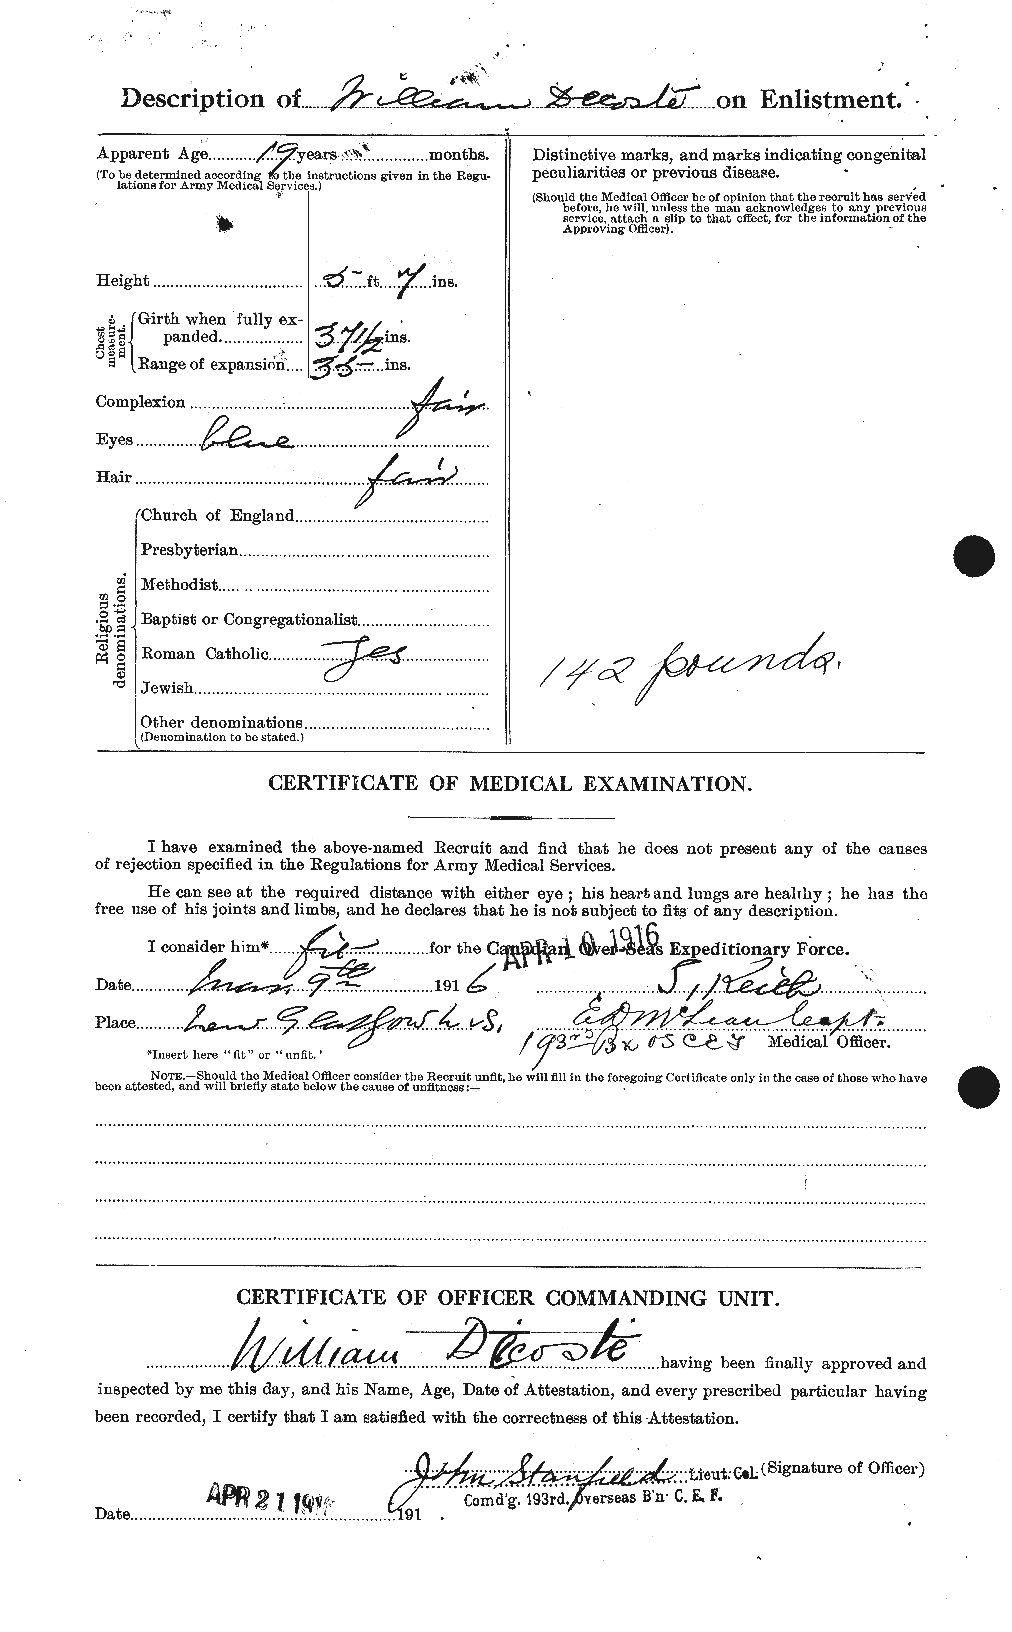 Personnel Records of the First World War - CEF 289216b